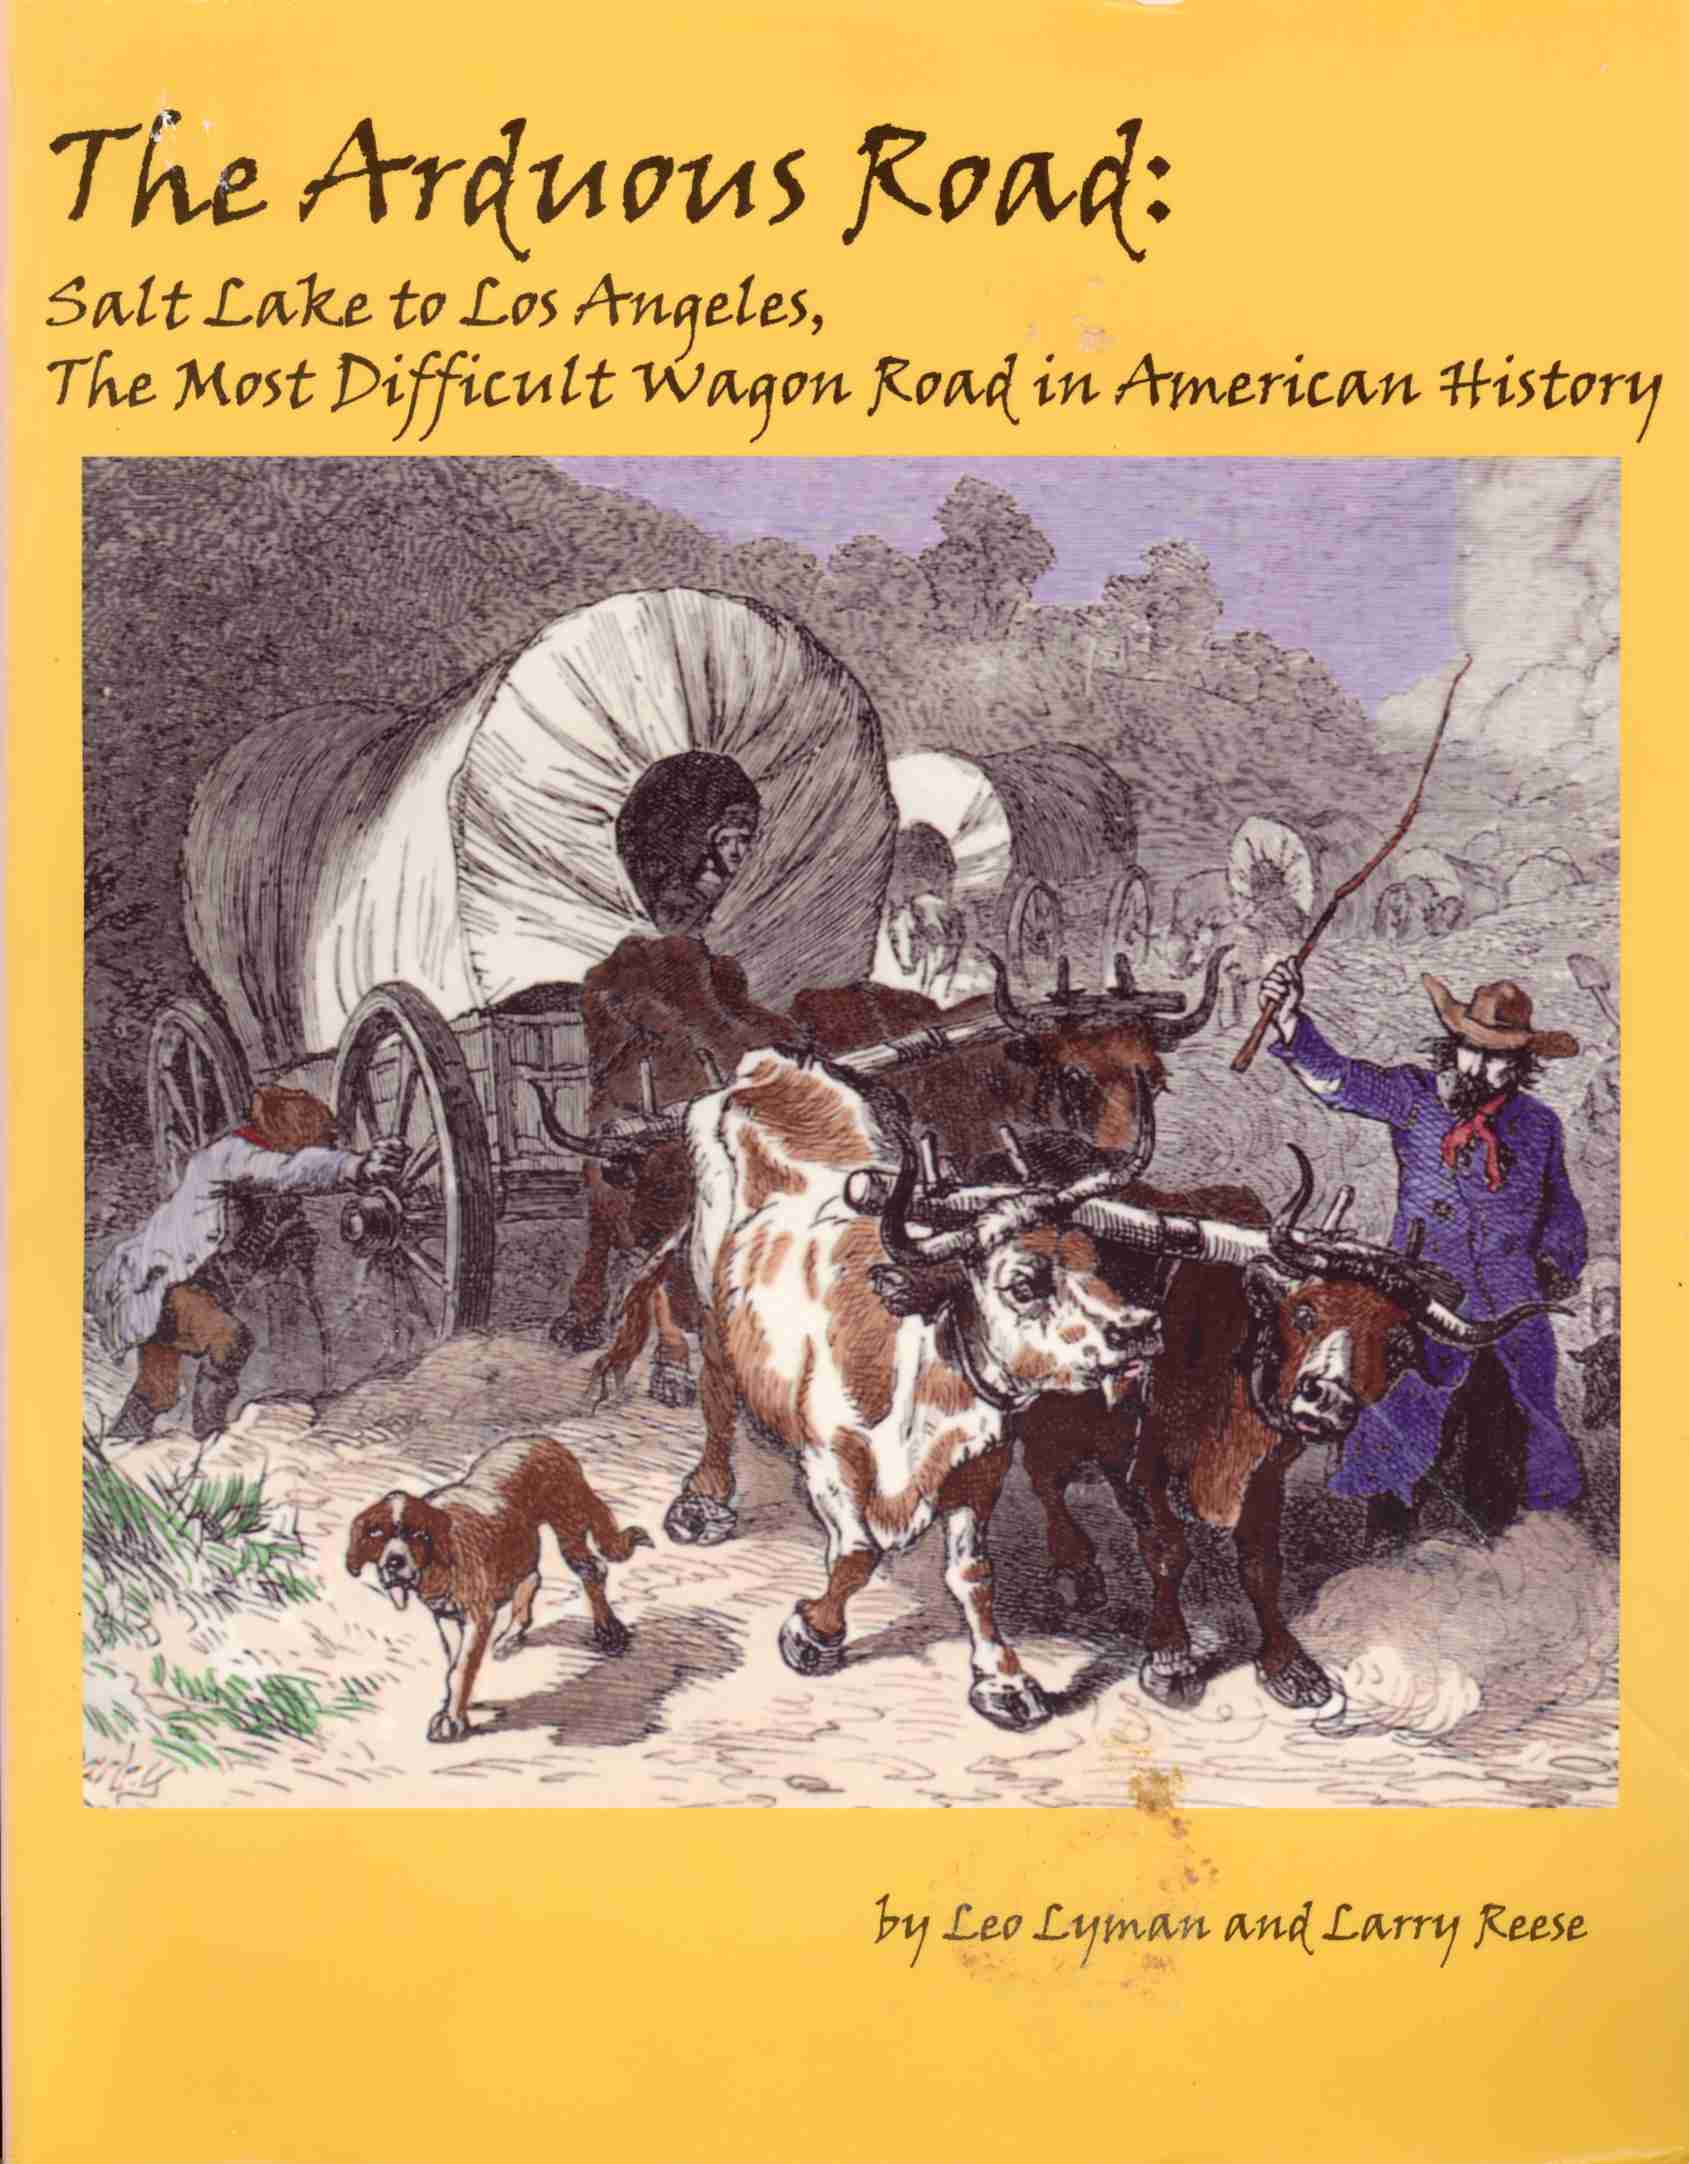 The Arduous Road: Salt Lake to Los Angeles, The Most Difficult Wagon Road in American History